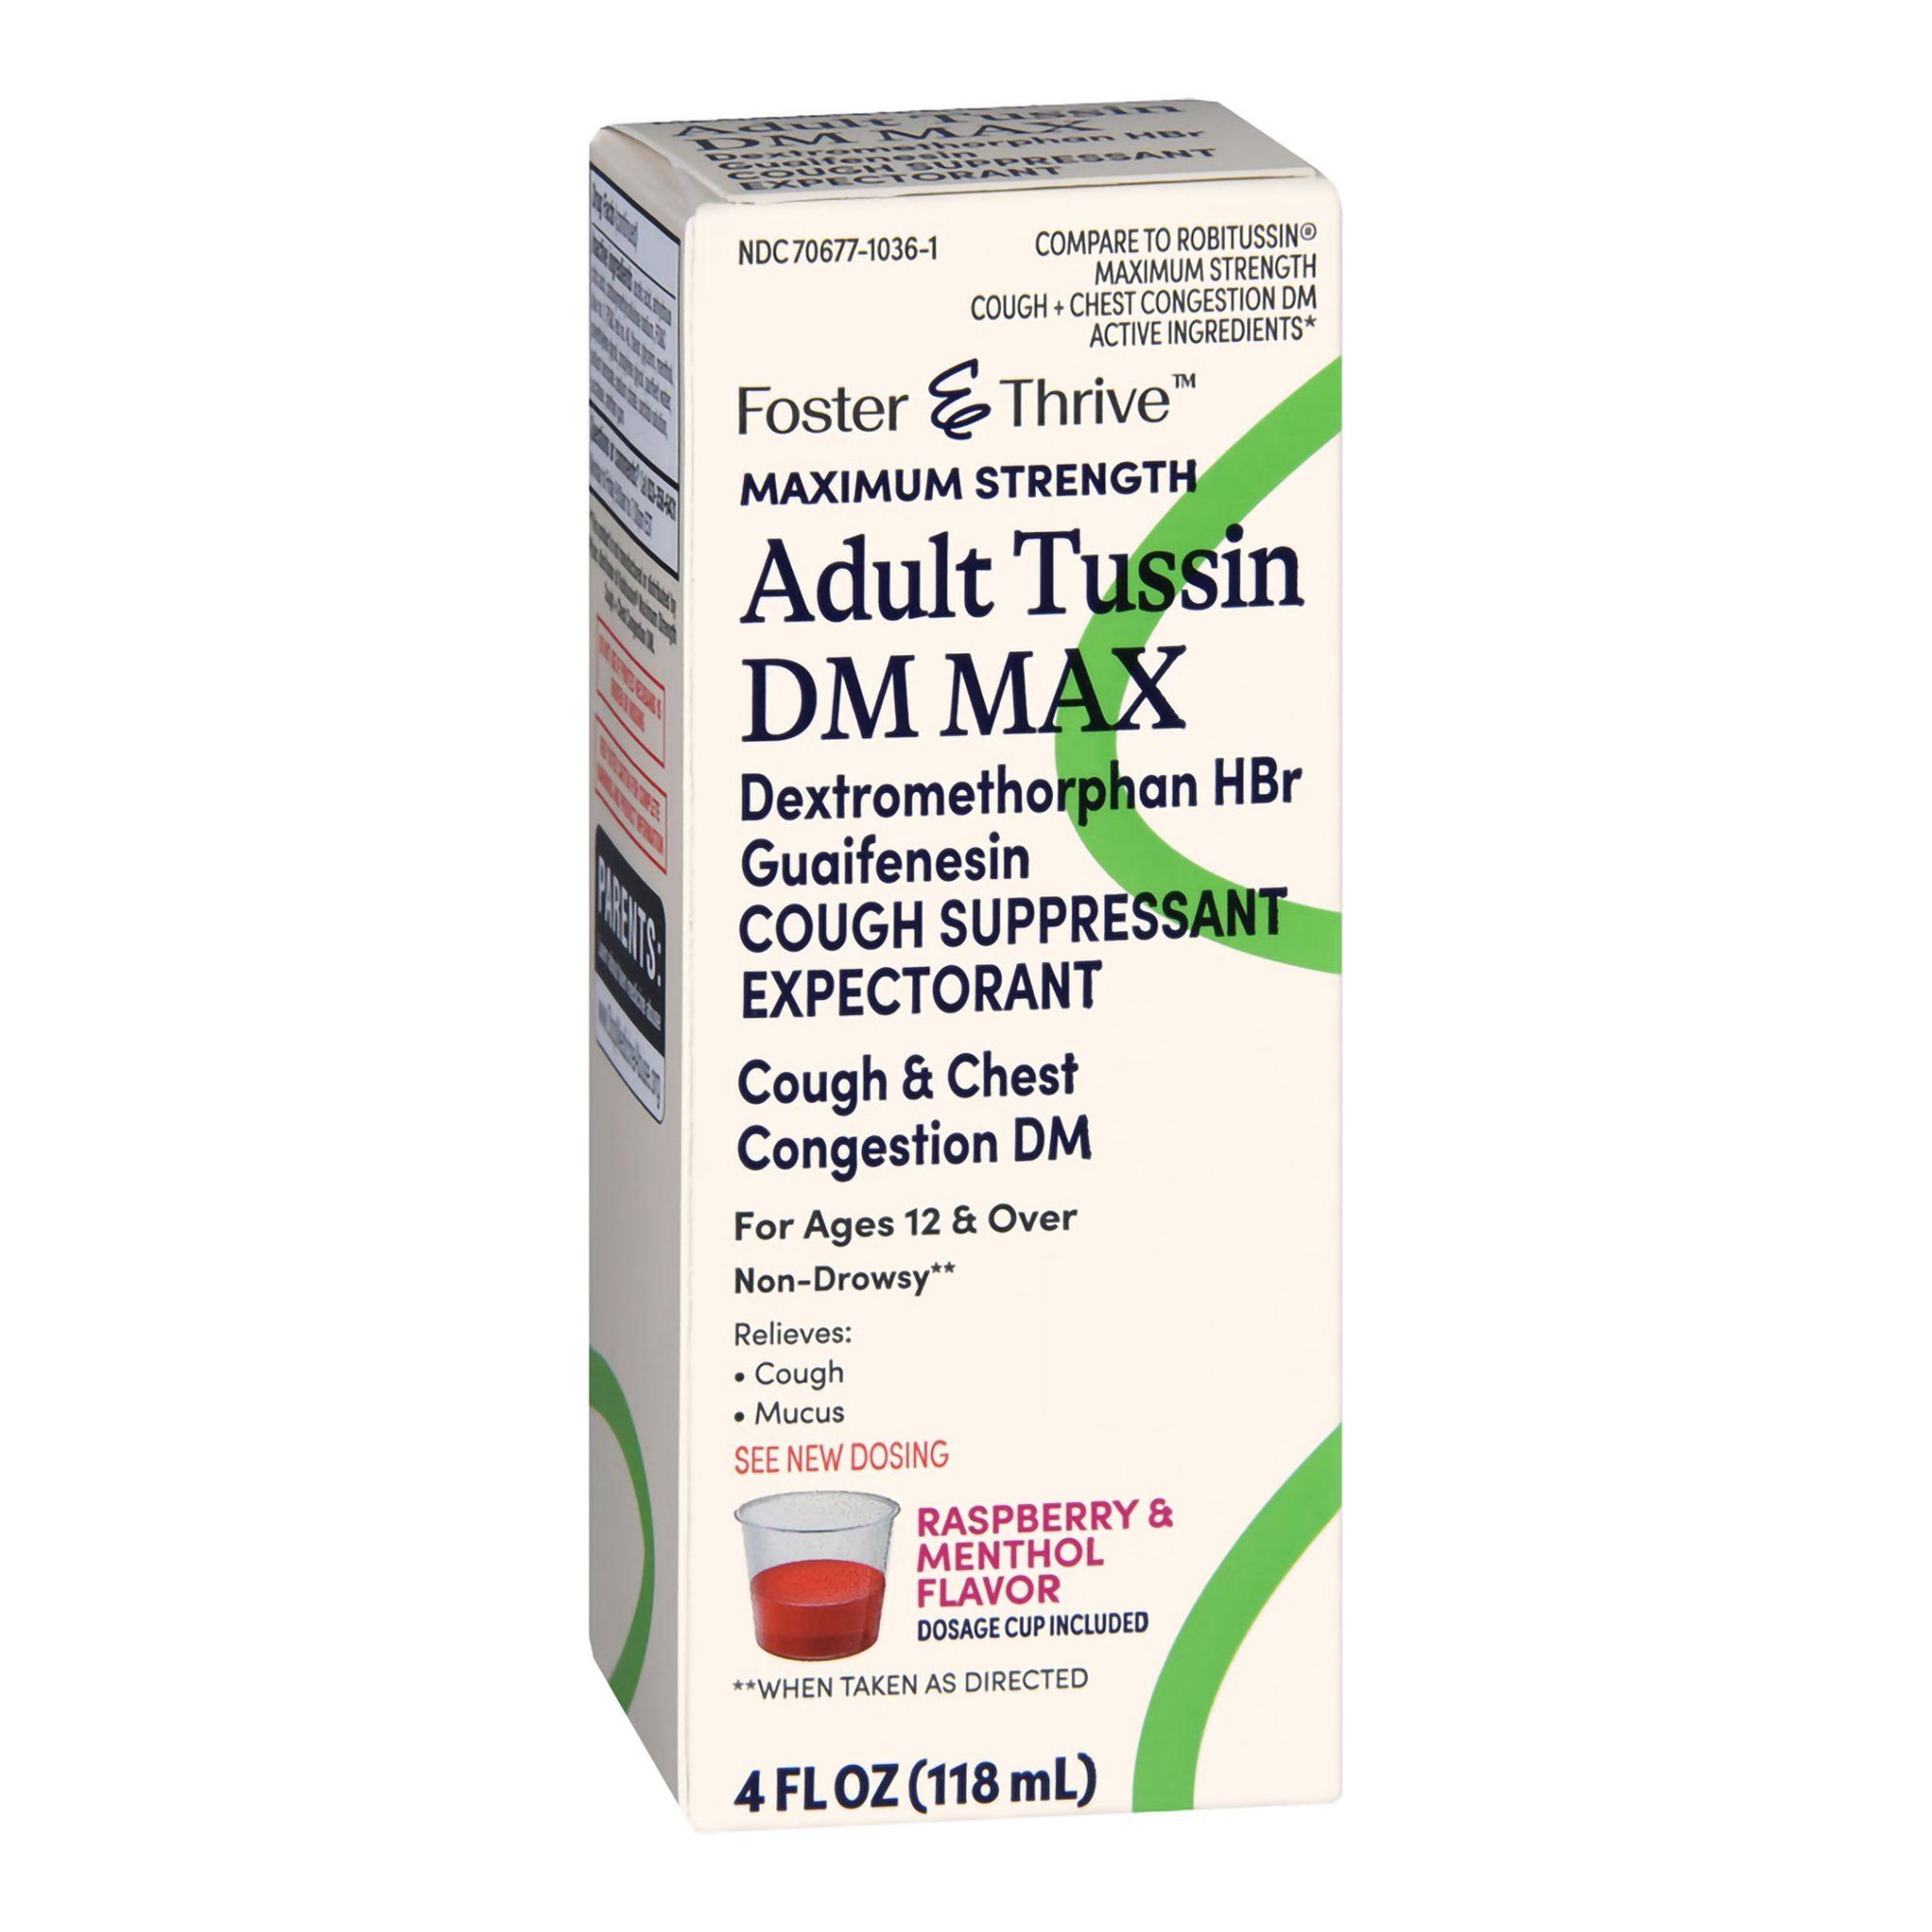 Foster & Thrive  Adult Tussin DM Max Cough & Chest Congestion Liquid, Cherry - 4 fl oz